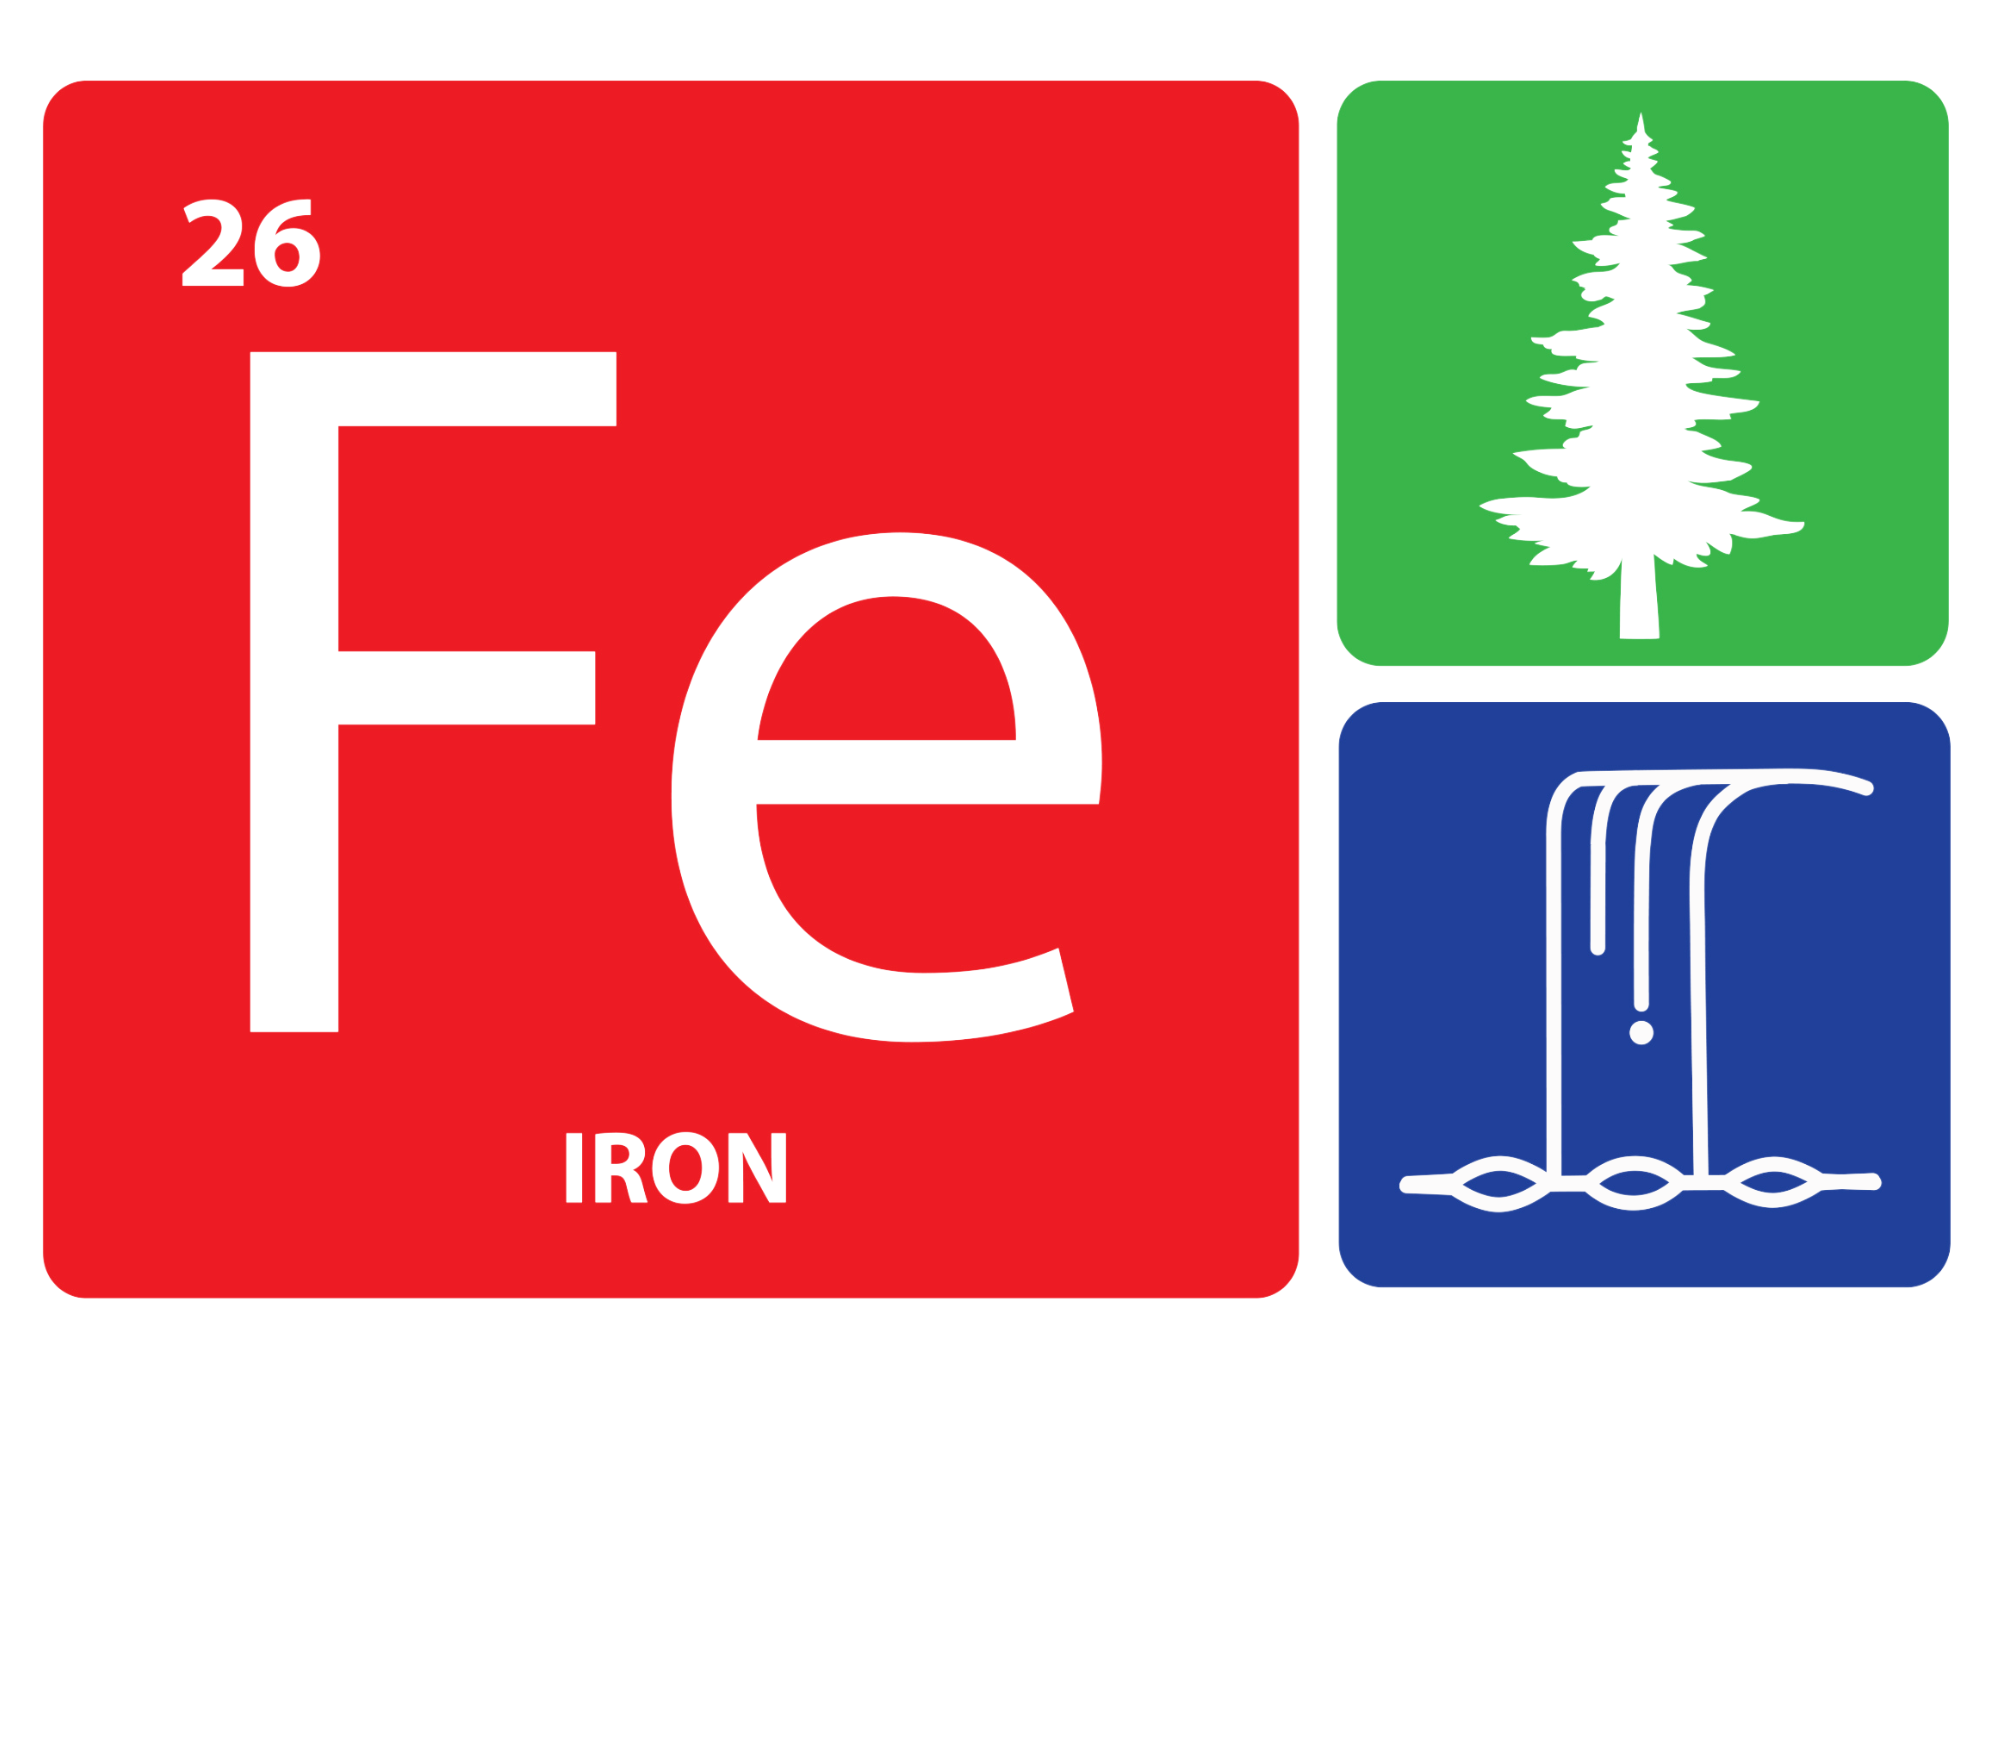 FeU logo with white lettering